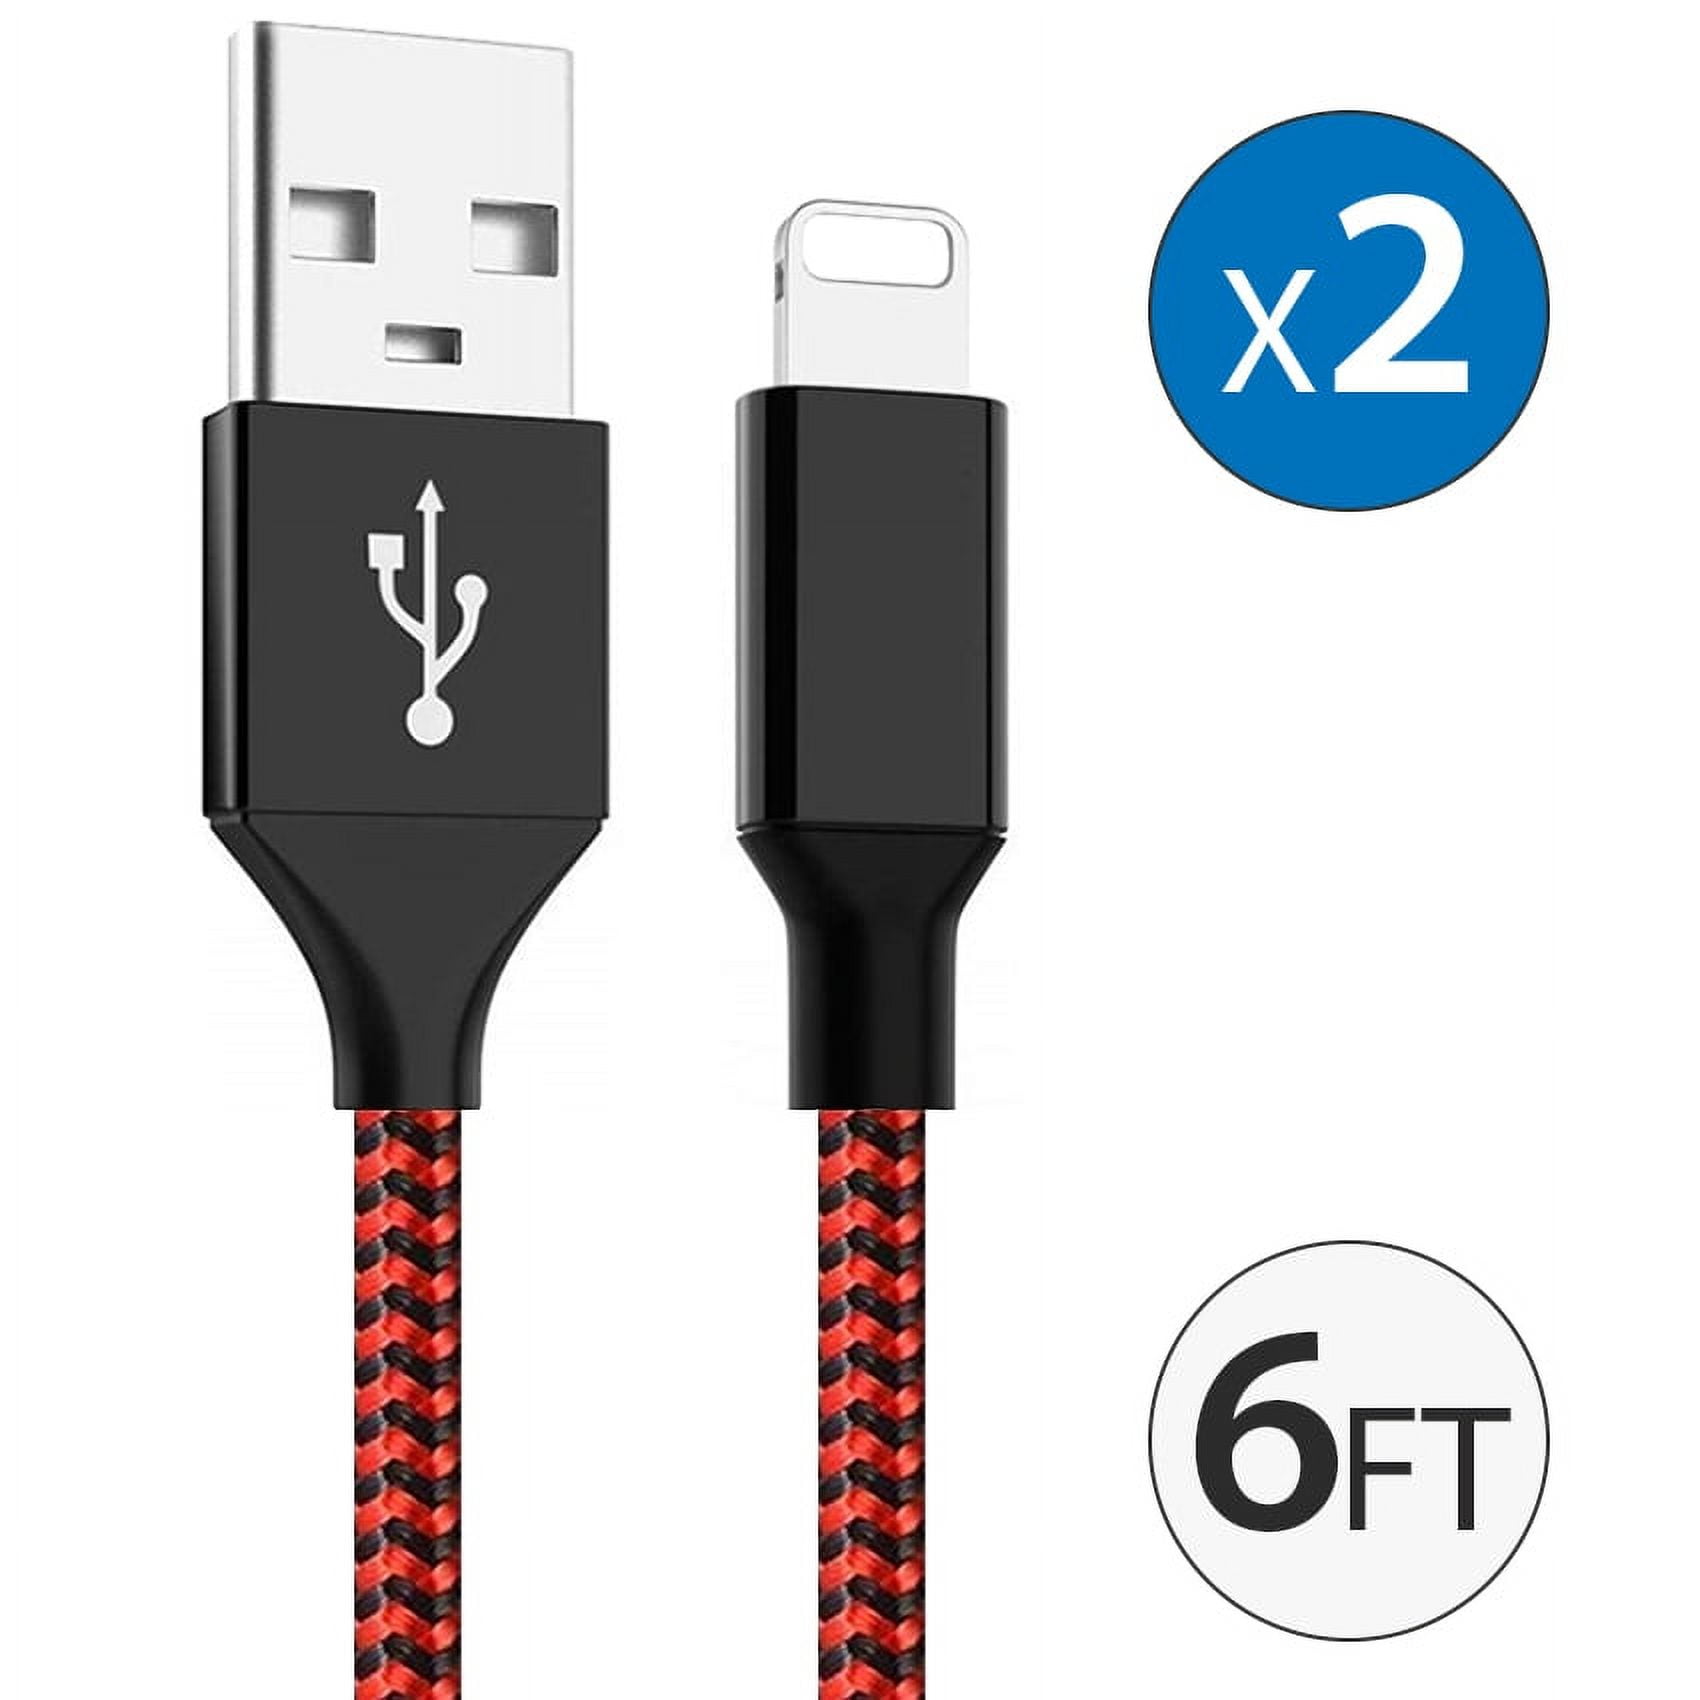 OUTAD iPhone Charger Cable, Borz 2-Pack 6FT Nylon Braided Lightning Charger  Cable Charging Cord USB Cable Compatible with iPhone 11 Pro Max XS XR X 8 7  6S 6 Plus SE 5S